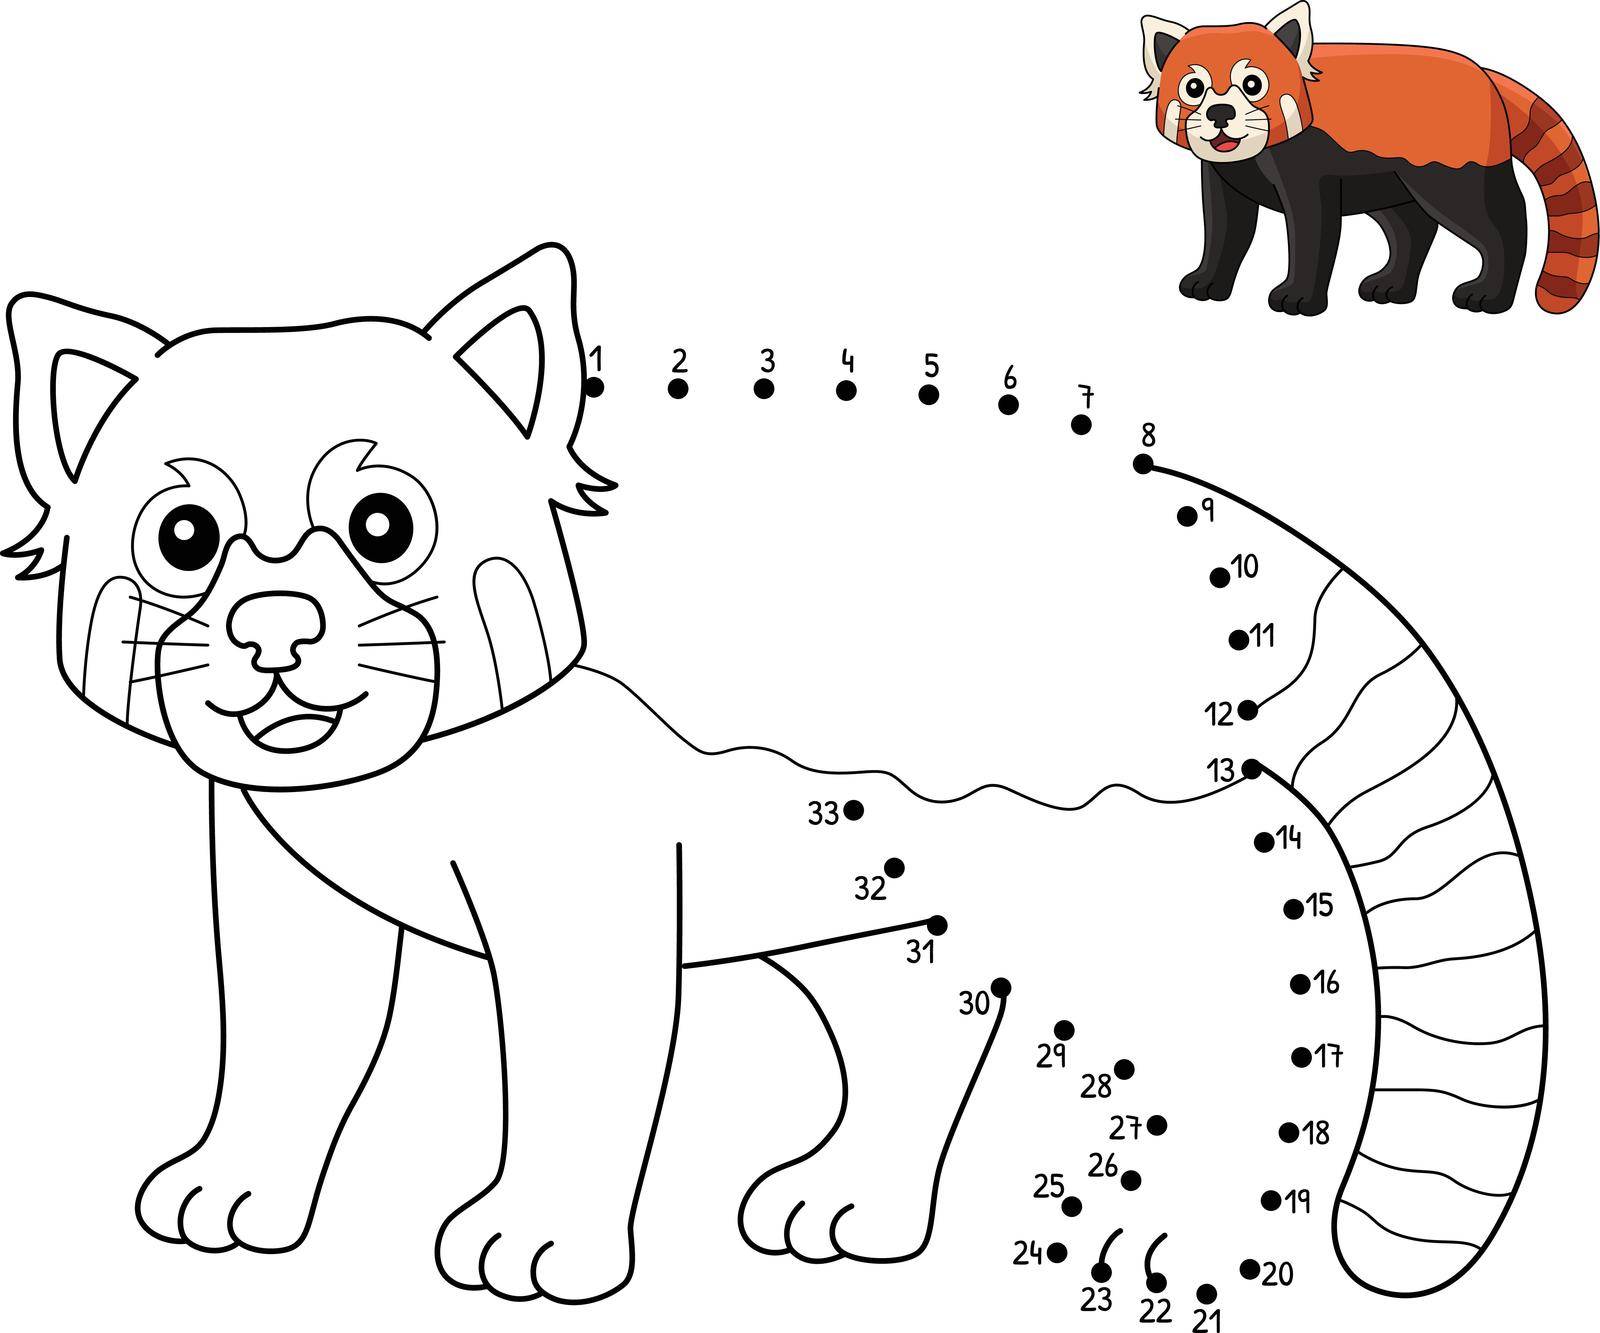 A cute and funny connect-the-dots coloring page of a Red Panda. Provides hours of coloring fun for children. Color, this page is very easy. Suitable for little kids and toddlers.